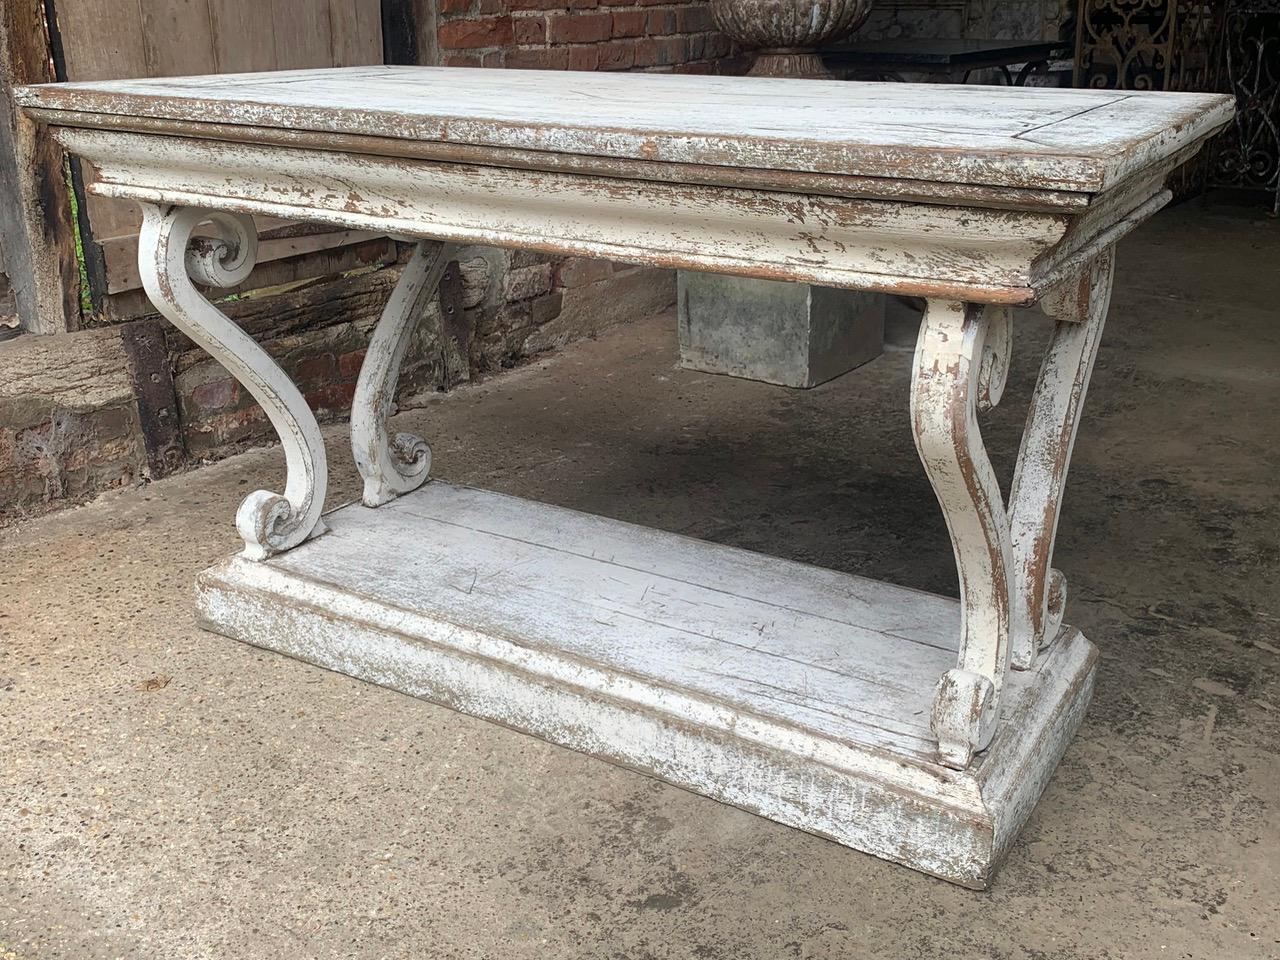 A beautiful early 19th century French oak drapers console table with gorgeous curved legs and nice old worn paint. The legs have wonderful elegant curves and scrolls giving it a great decorative look.

Please contact us for a shipping quote,